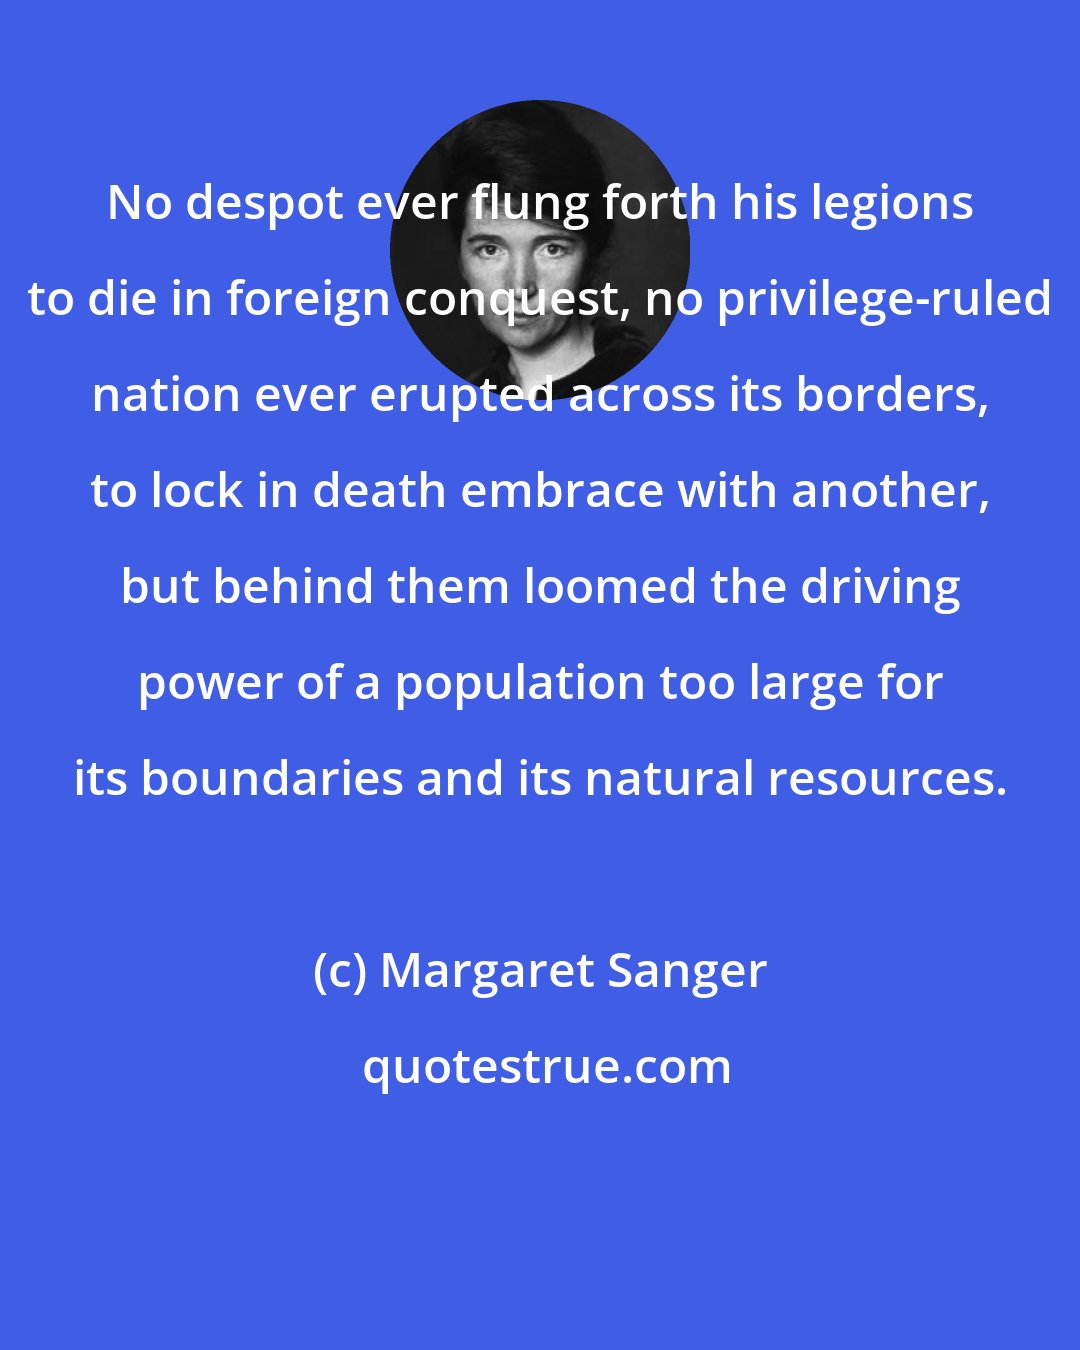 Margaret Sanger: No despot ever flung forth his legions to die in foreign conquest, no privilege-ruled nation ever erupted across its borders, to lock in death embrace with another, but behind them loomed the driving power of a population too large for its boundaries and its natural resources.